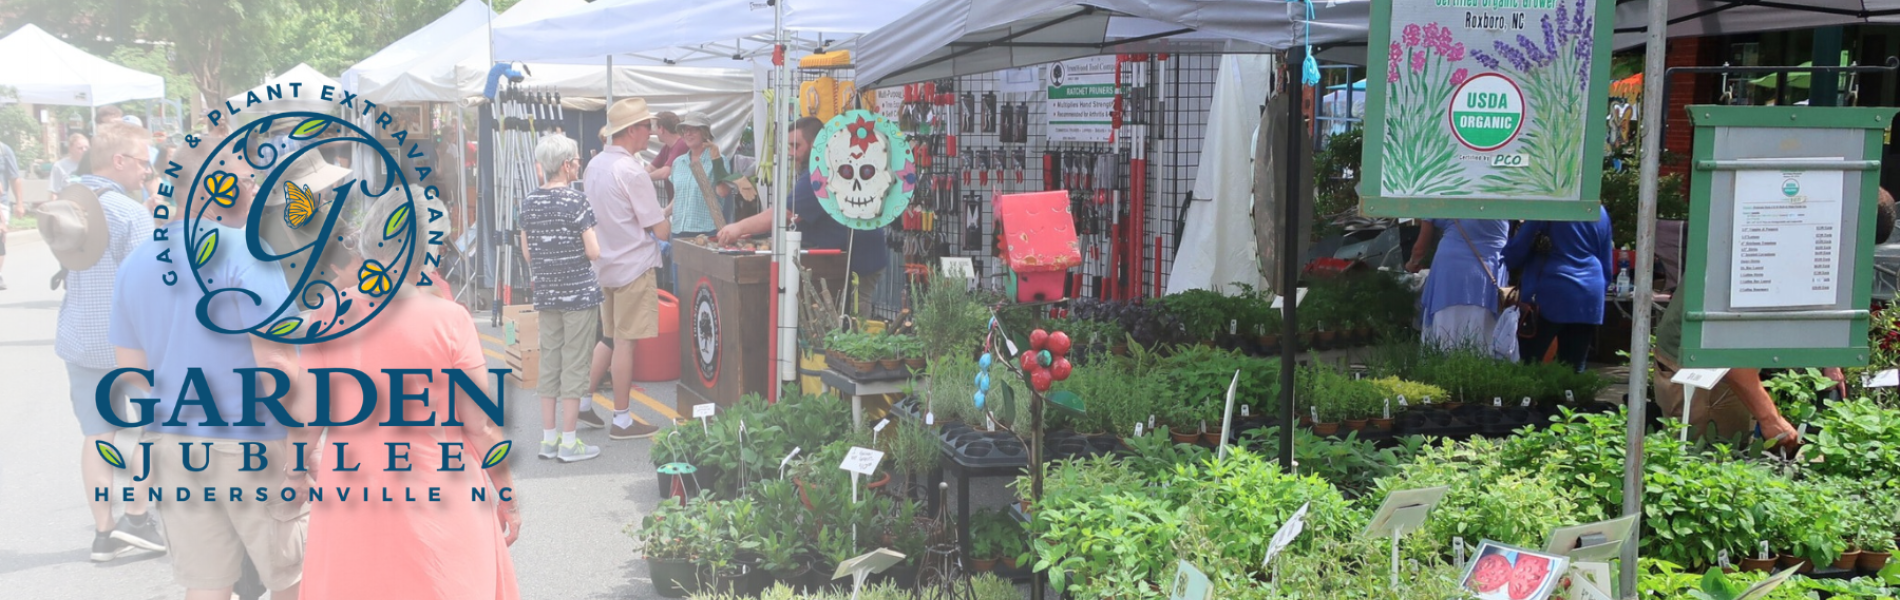 image of plants and tent at garden jubilee festival